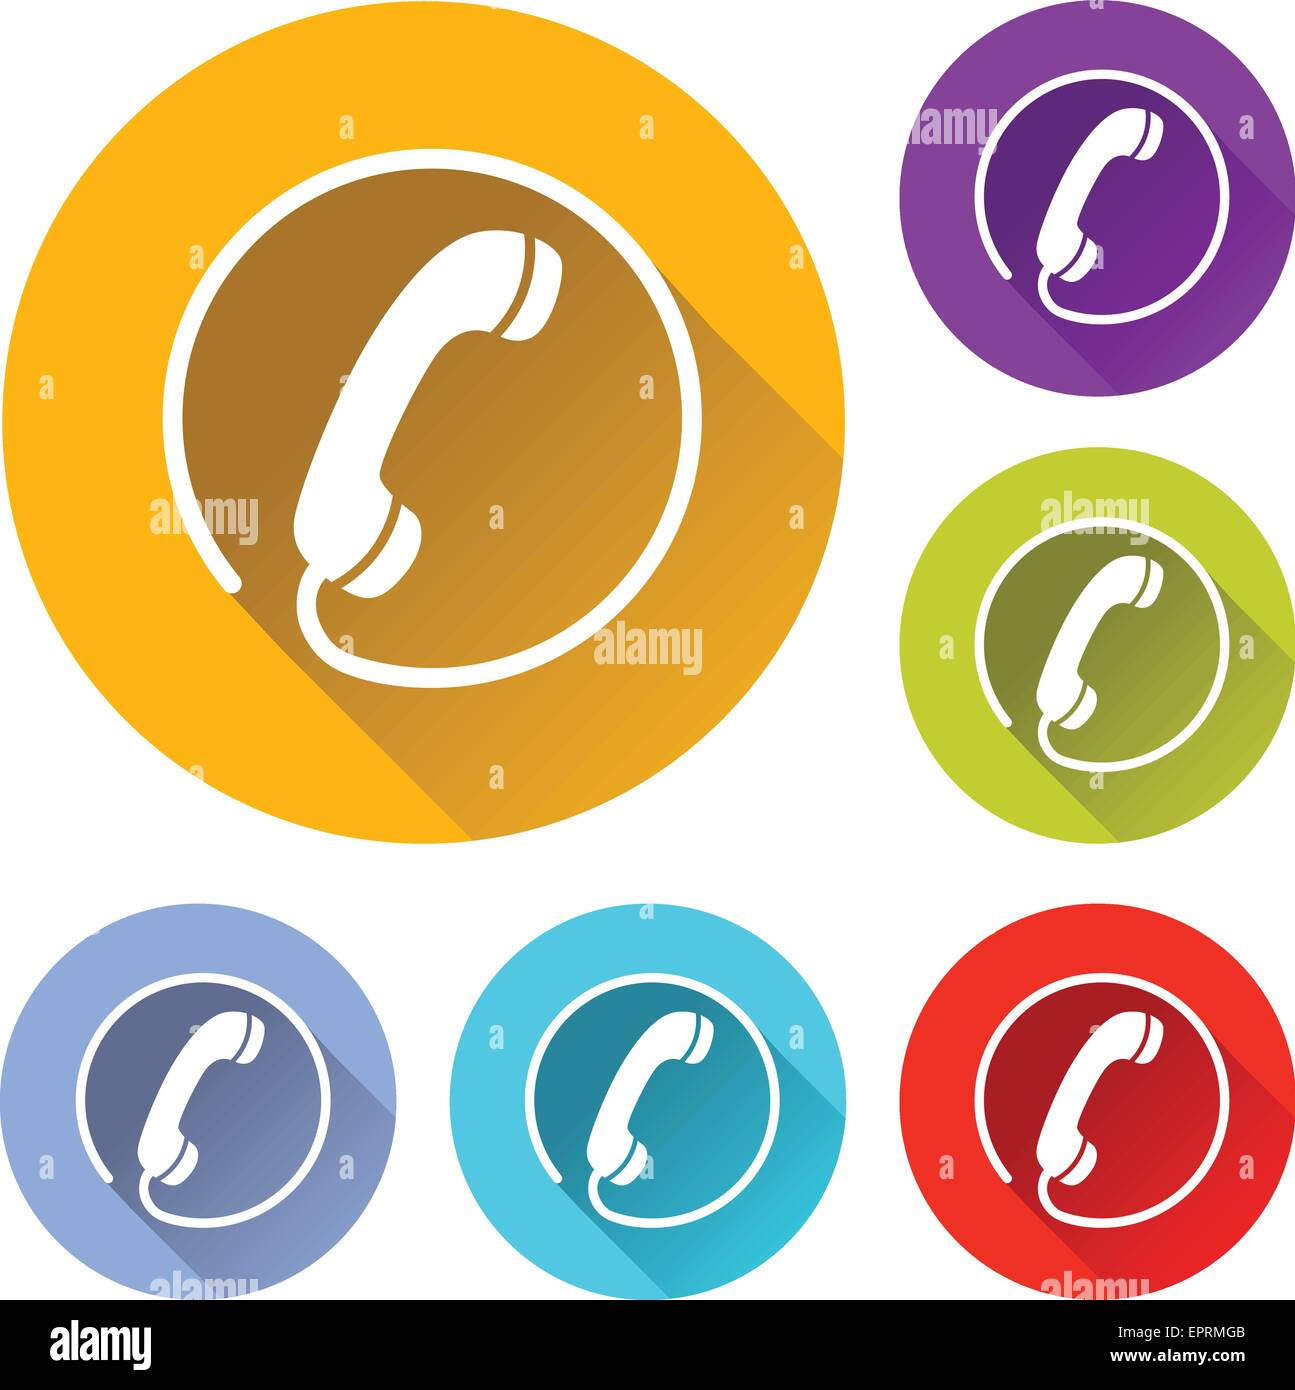 vector illustration of six colorful phone icons Stock Vector